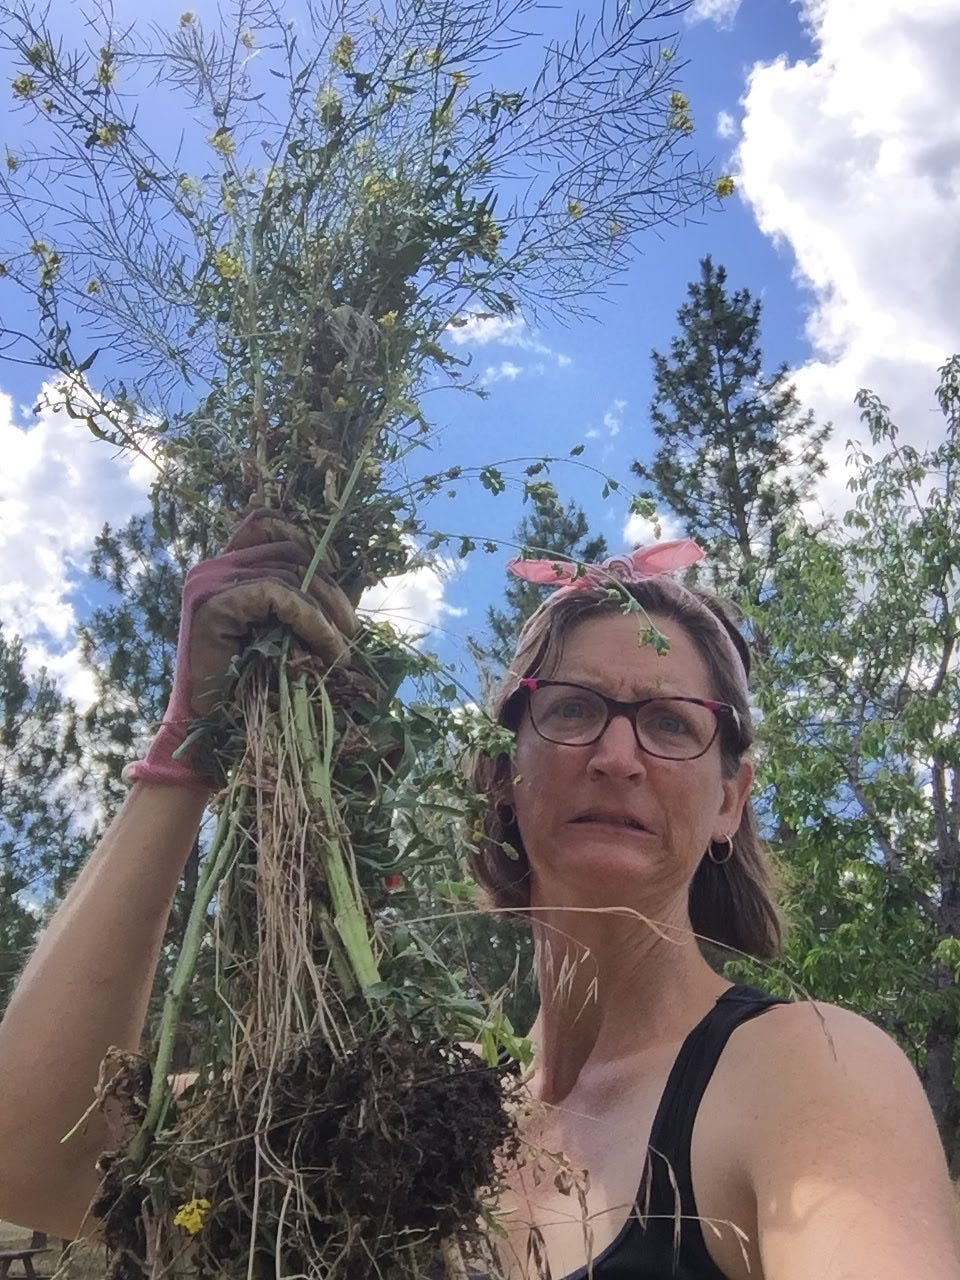 me, wearing a black tanktop with a pink bandana tied in my hair, trying to look tough, holding a fistful of huge weeds against the backdrop of a blue sky with puffy clouds